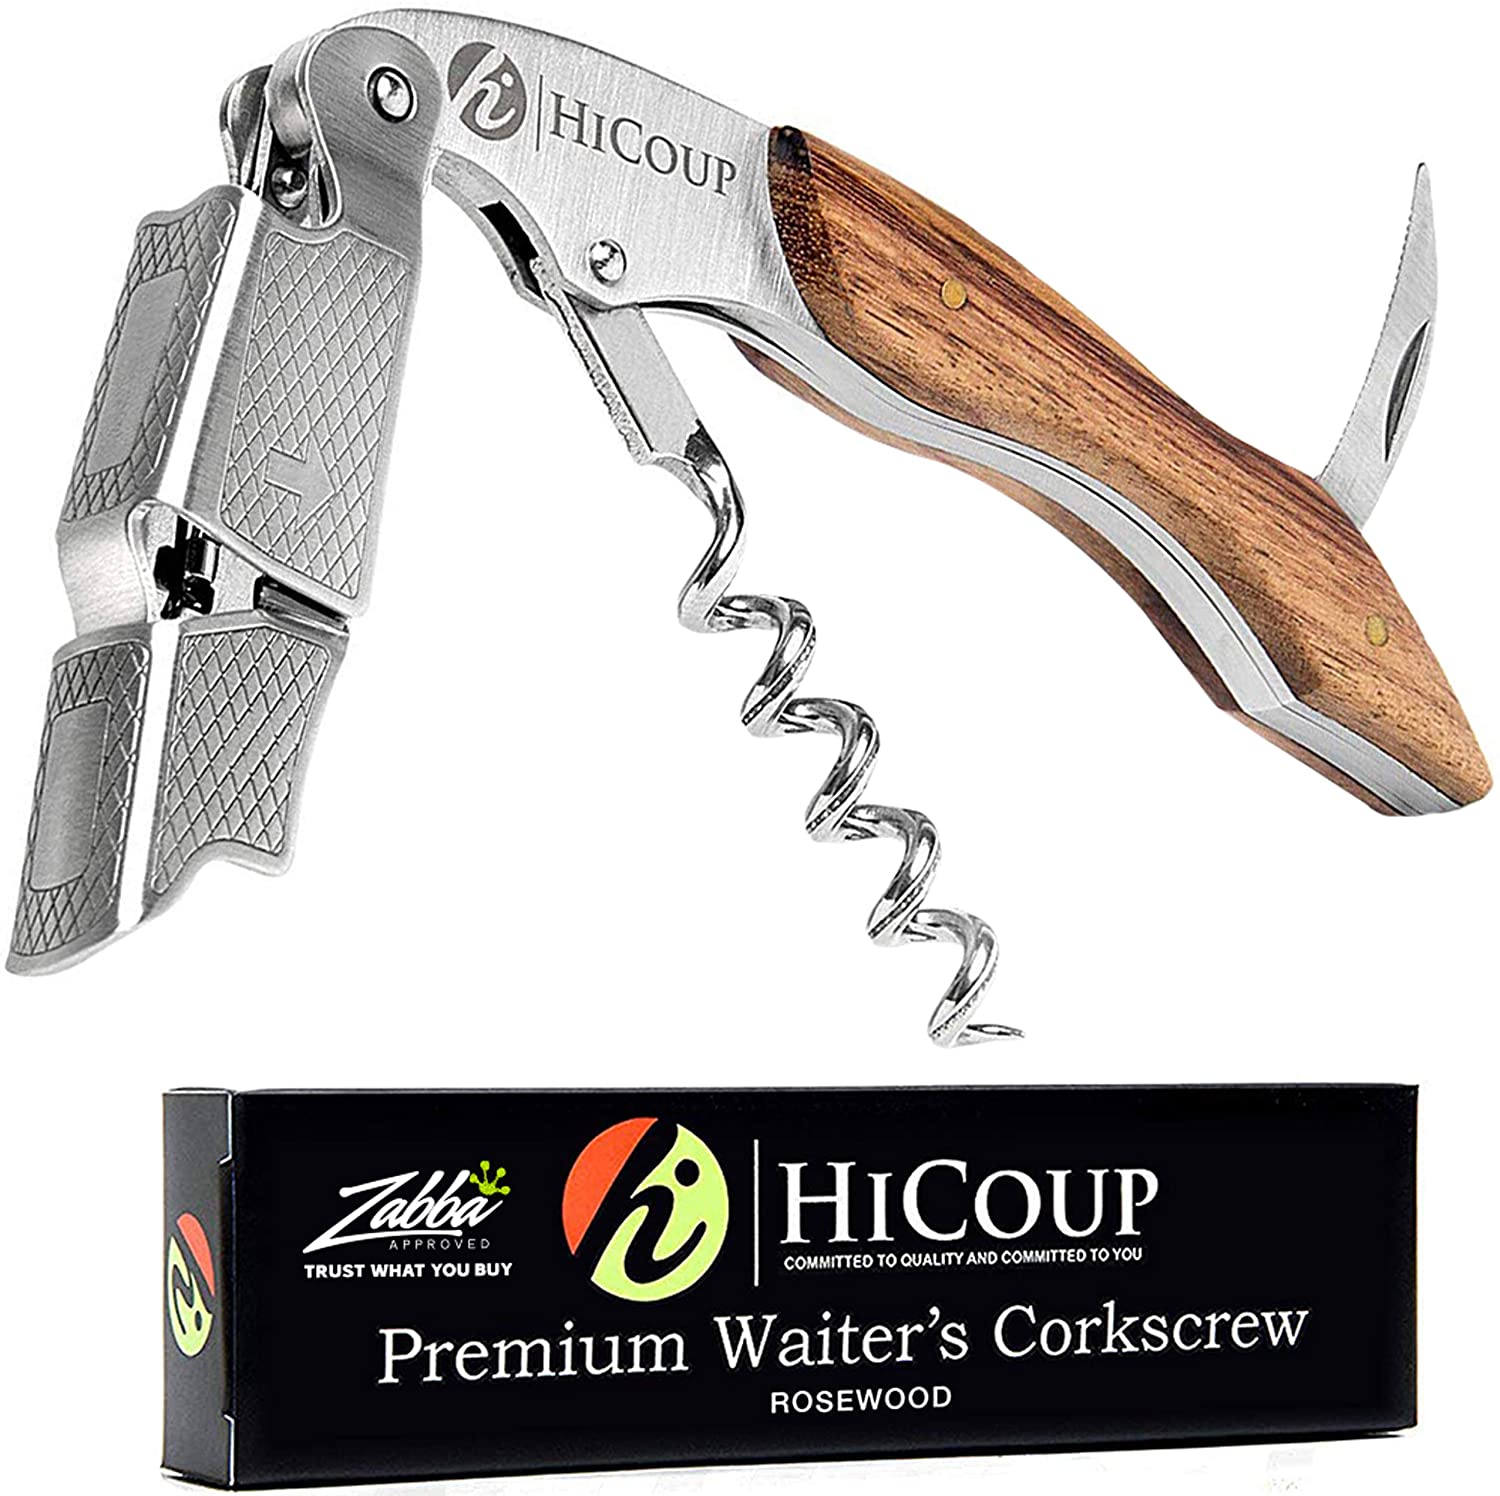 Waiters and Bartenders Around the World Bottle Opener and Foil Cutter Wei&KYNM Professional Wine Opener the Favoured Choice of Sommeliers Carbon Steel All-in-one Waiters Corkscrew Yellow 